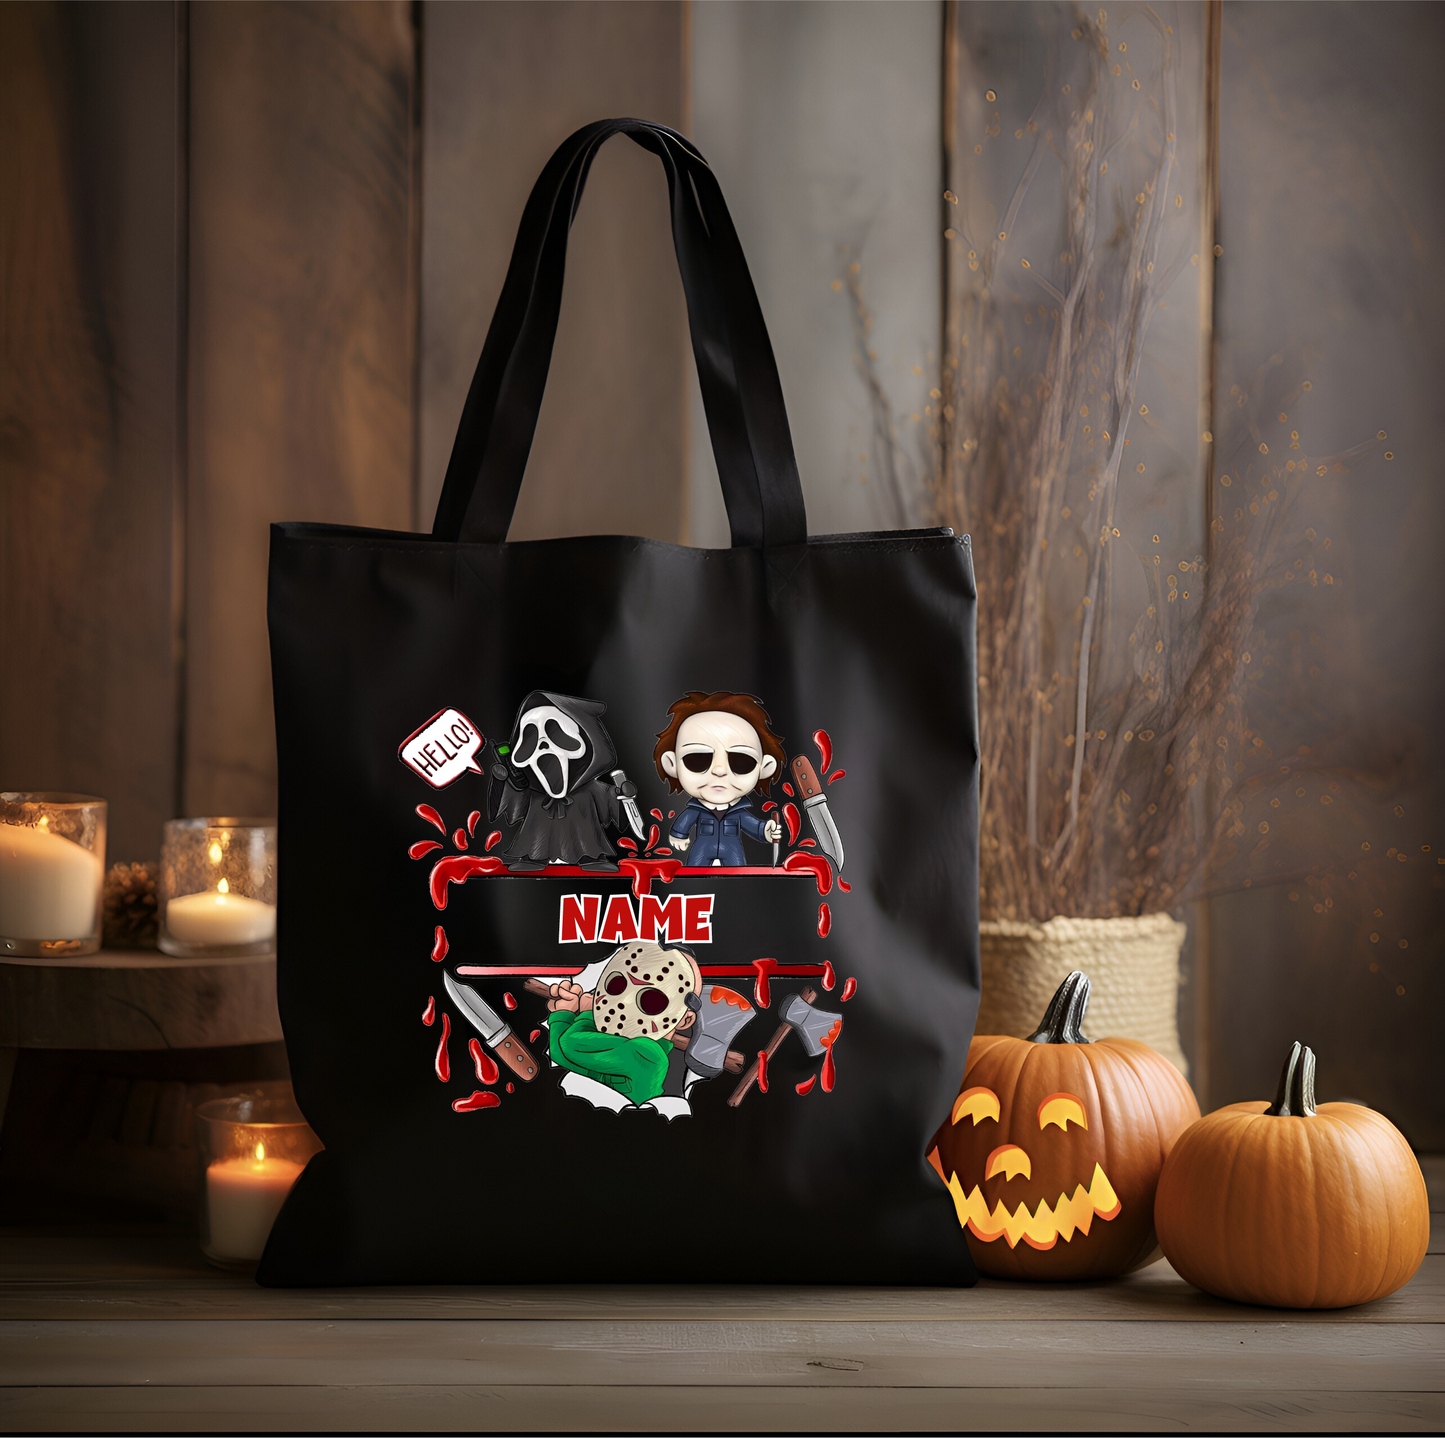 Personalized Trick or Treat Bags - Many Designs to Choose From!